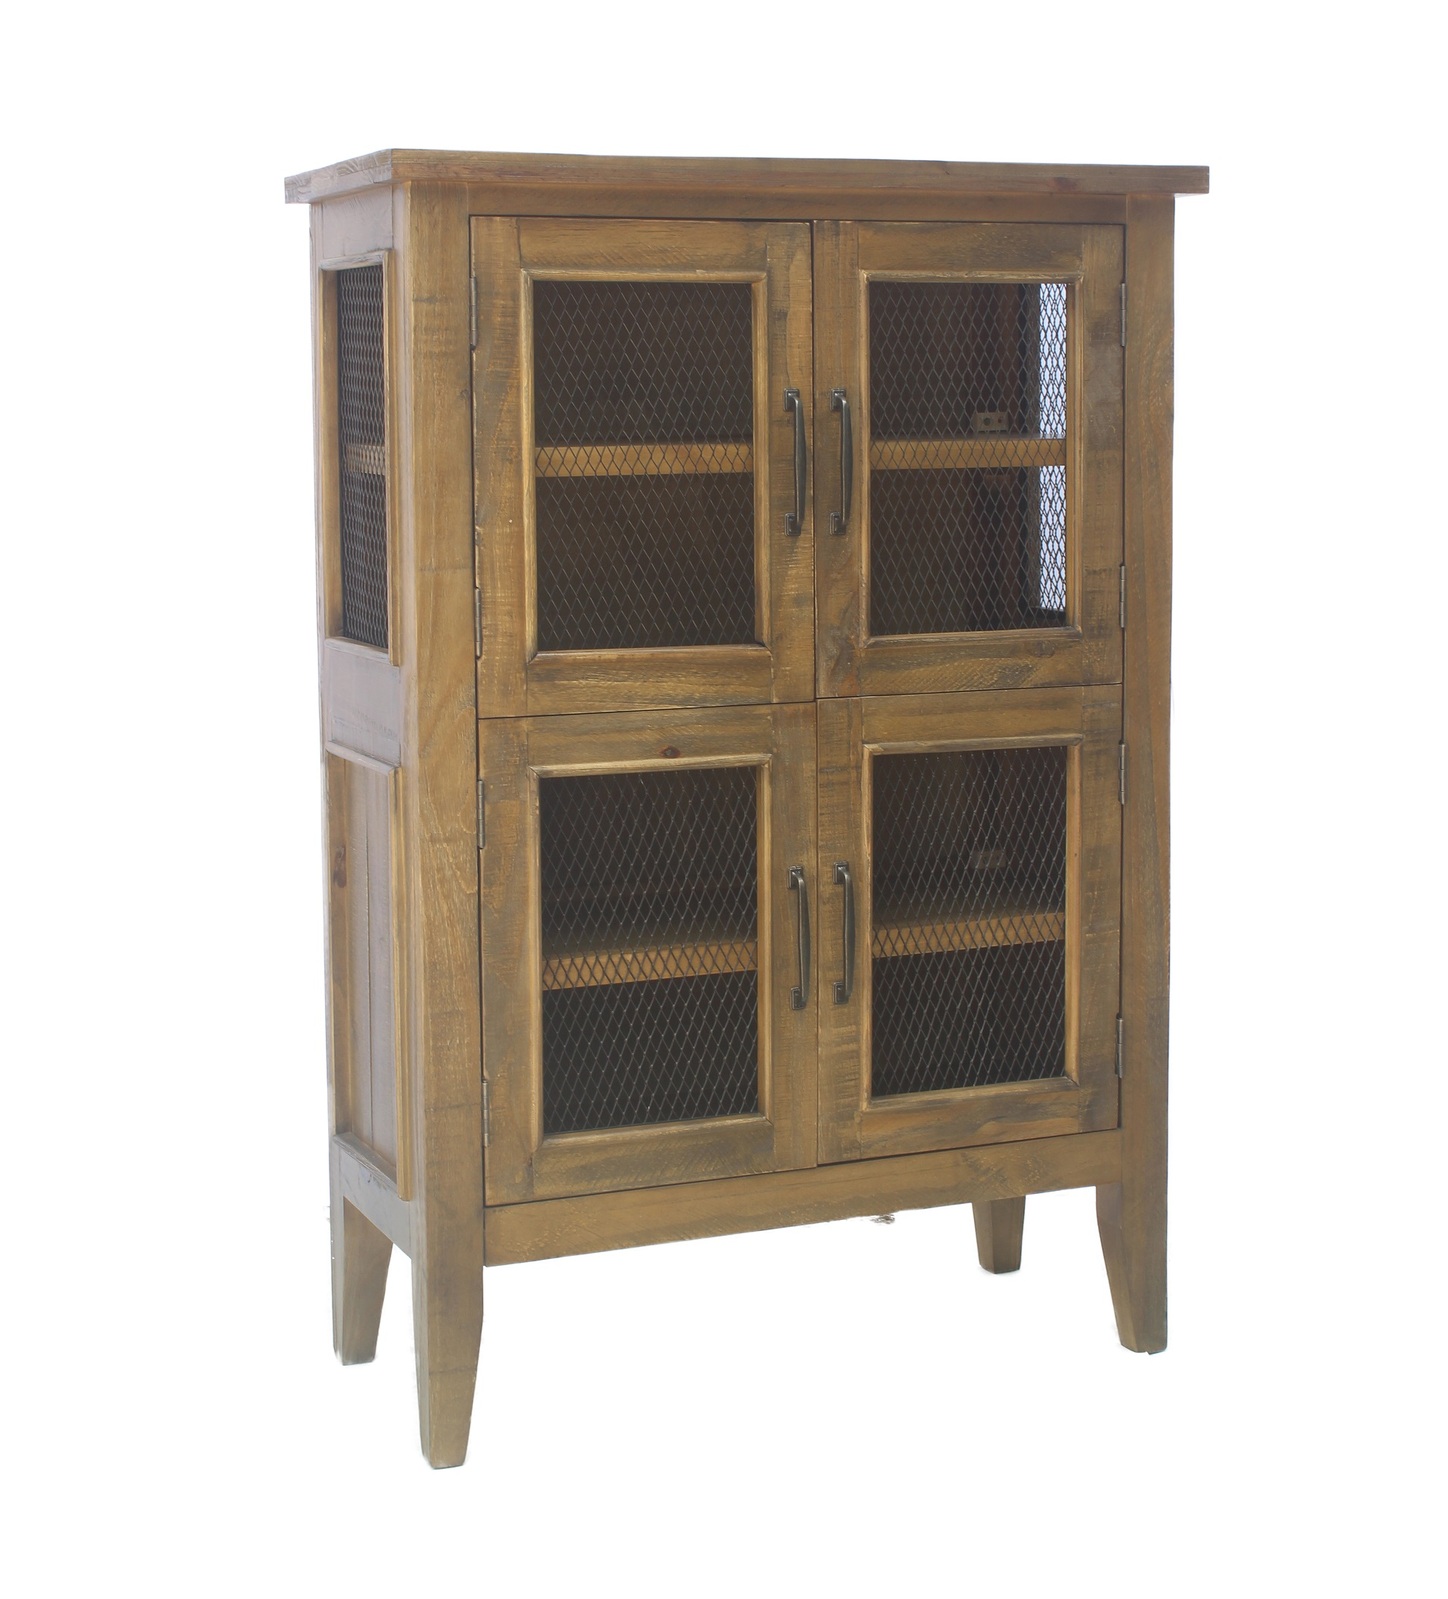 Rustic Timber 4 Door Meat Safe Kitchen Cabinet Rustic Cupboard with Mesh Insets Trafalgar